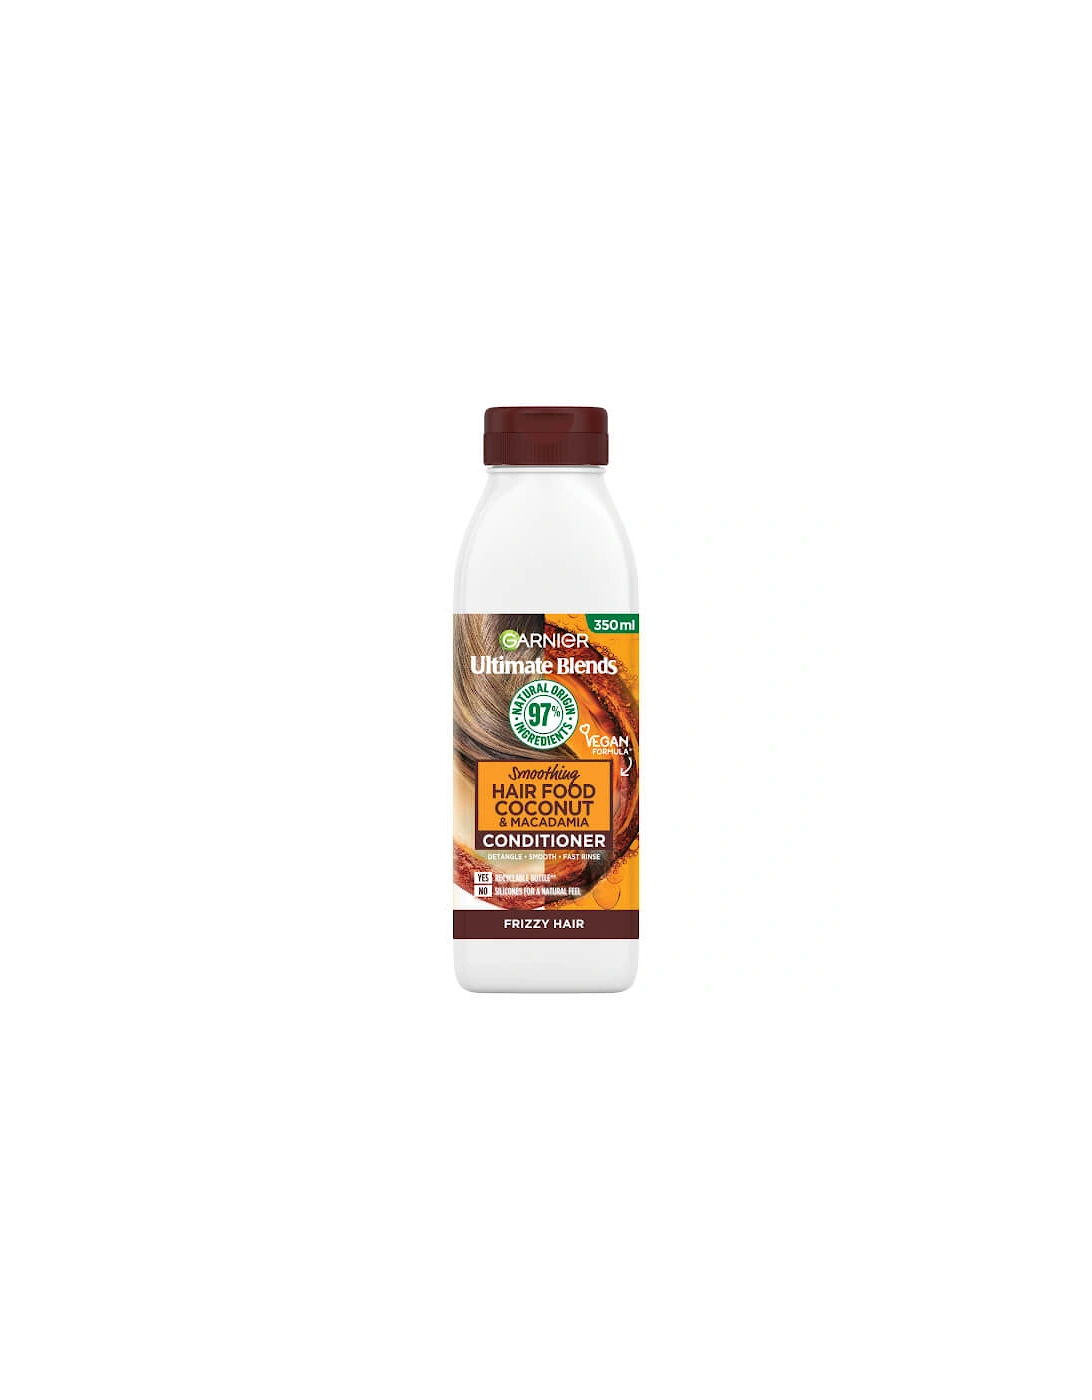 Ultimate Blends Smoothing Hair Food Coconut Conditioner for Frizzy Hair 350ml - Garnier, 2 of 1